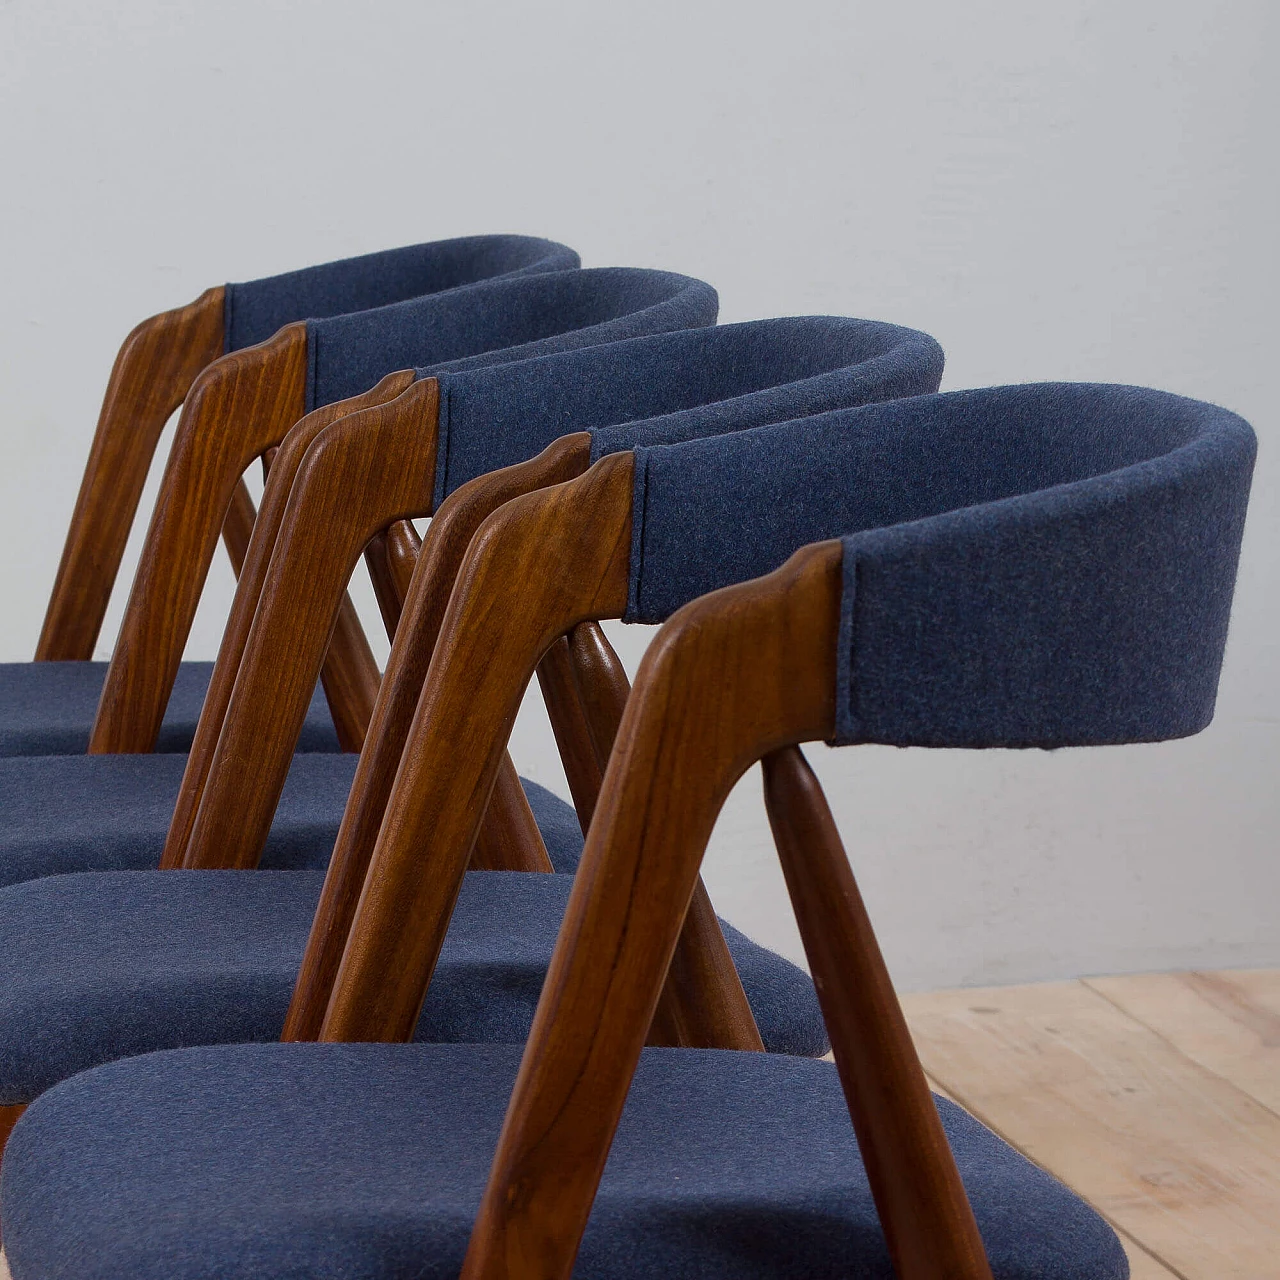 4 Chairs in teak by Thomas Harlev for Farstrup Møbler, 1950s 19